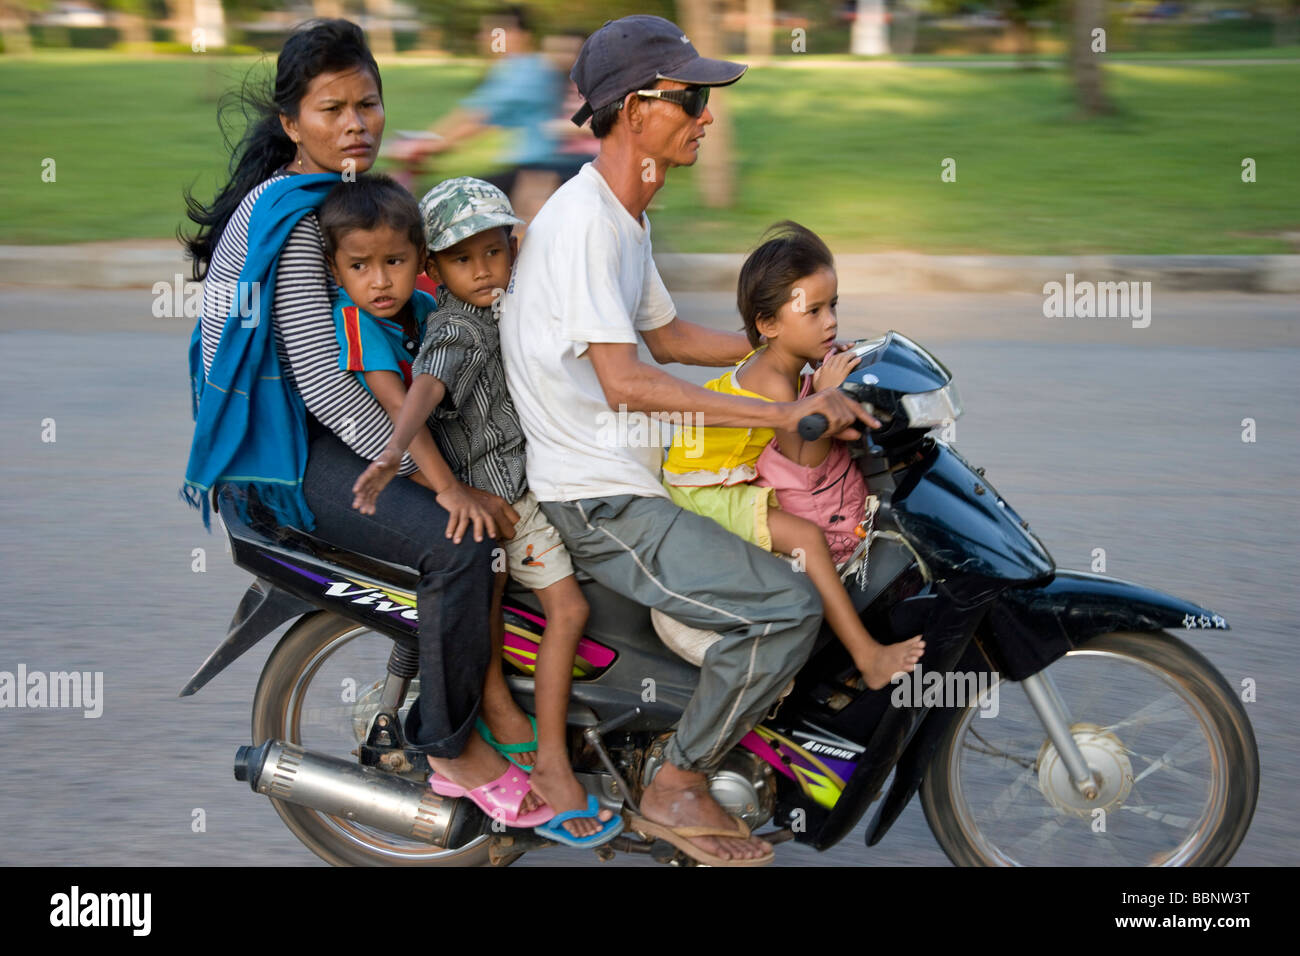 Siem Reap,Cambodia;Family riding on a scooter together without safety helmets Stock Photo